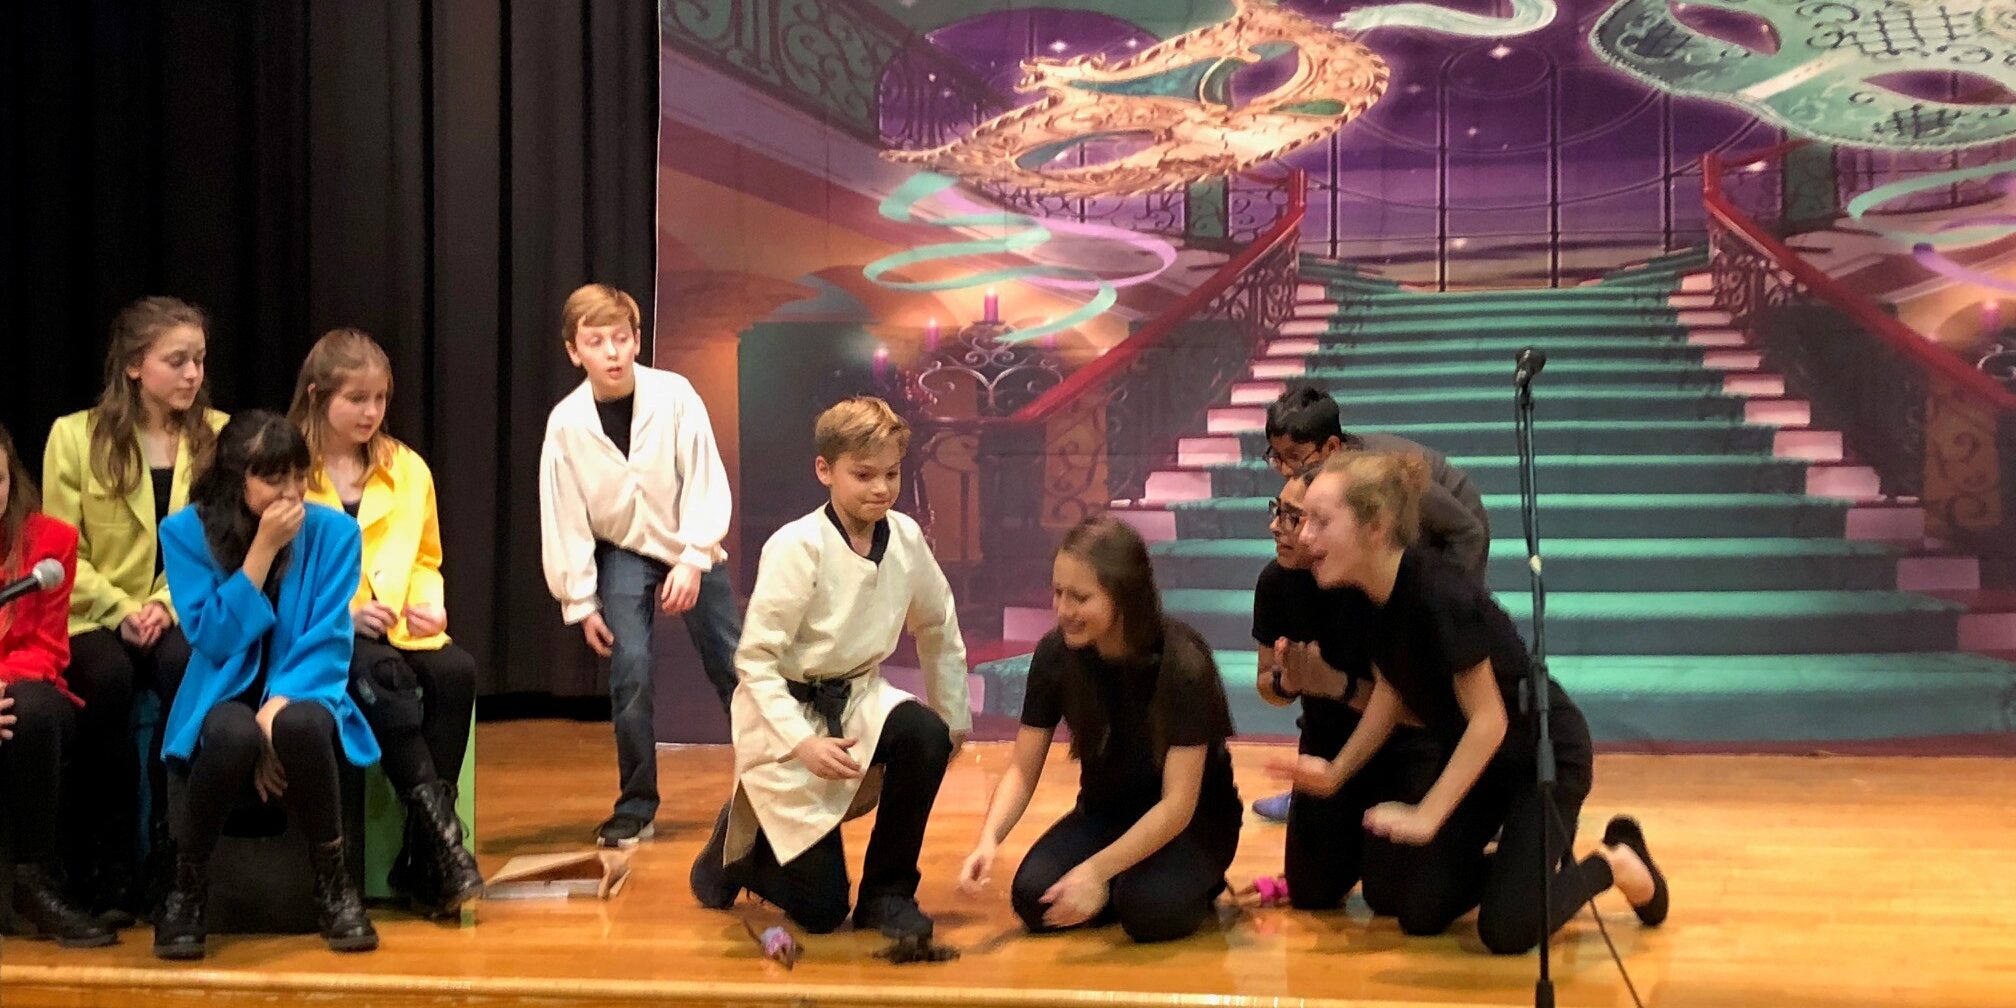 2019 Summer Camps for Acting, Theater, Drama